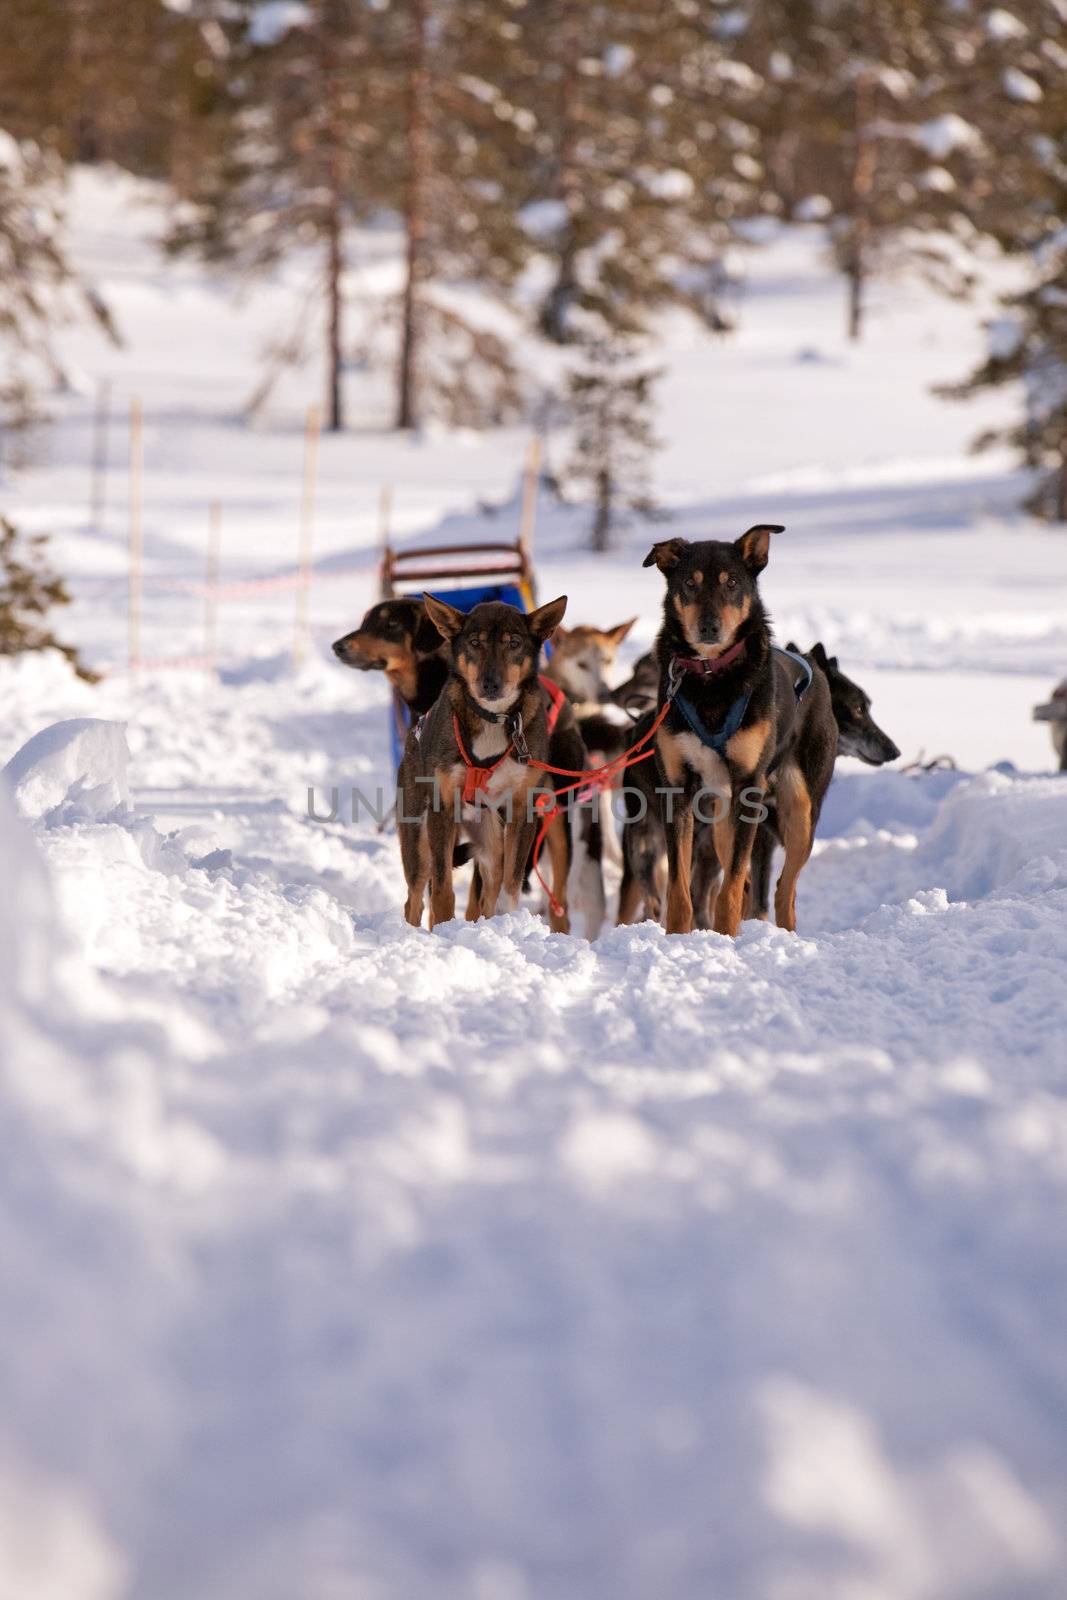 Sled dogs waiting in a winter landscape